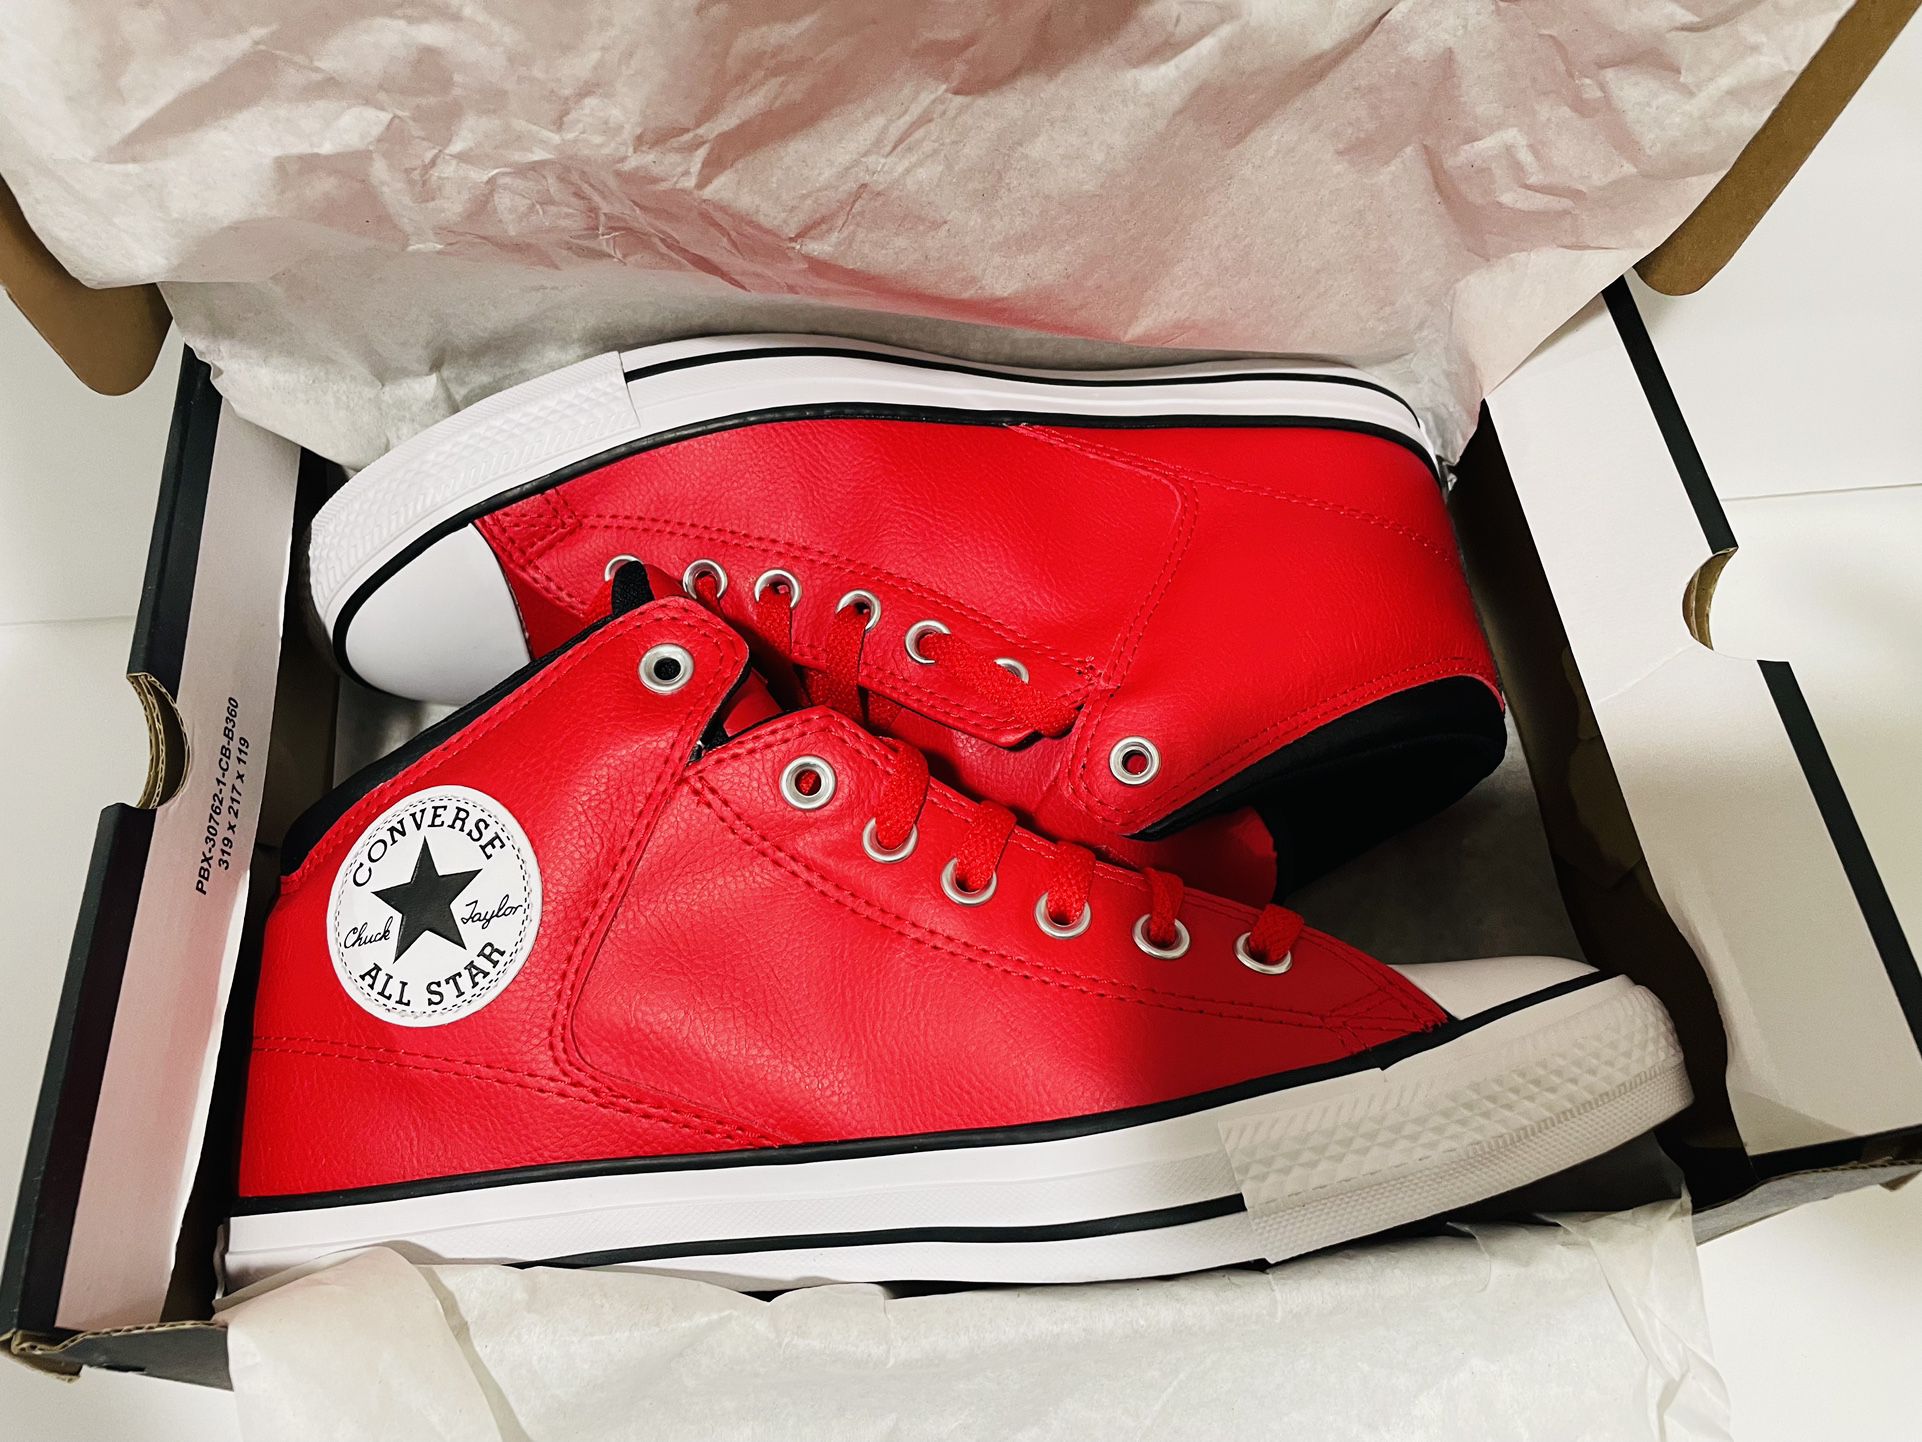 Brand New Converse High Street Mid University Red/White Men's 10 for Sale  in Camarillo, CA - OfferUp